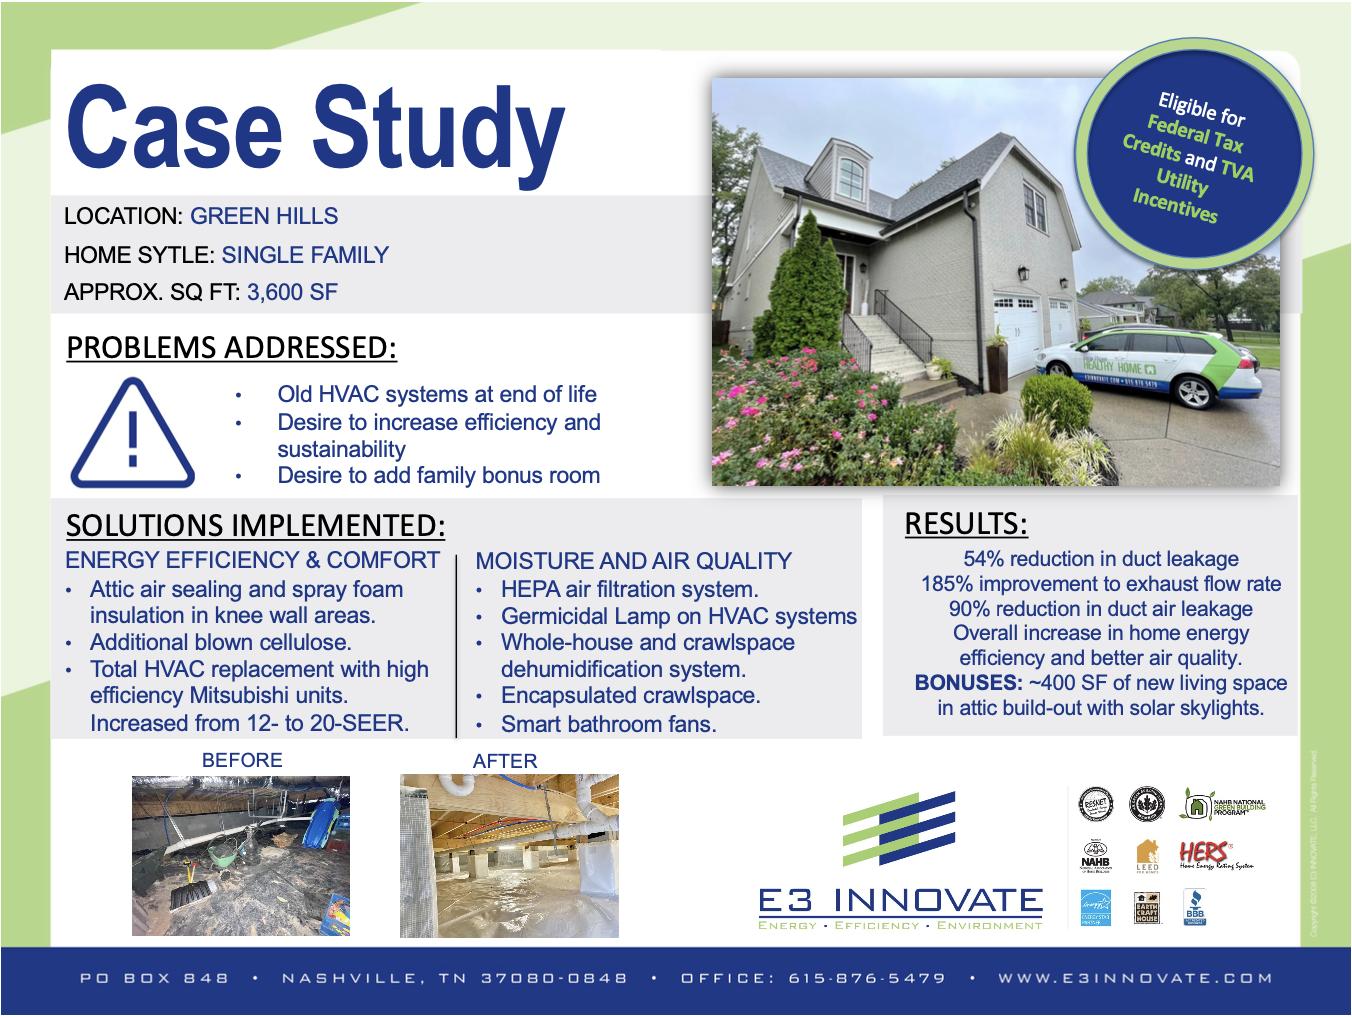 Case Study Results